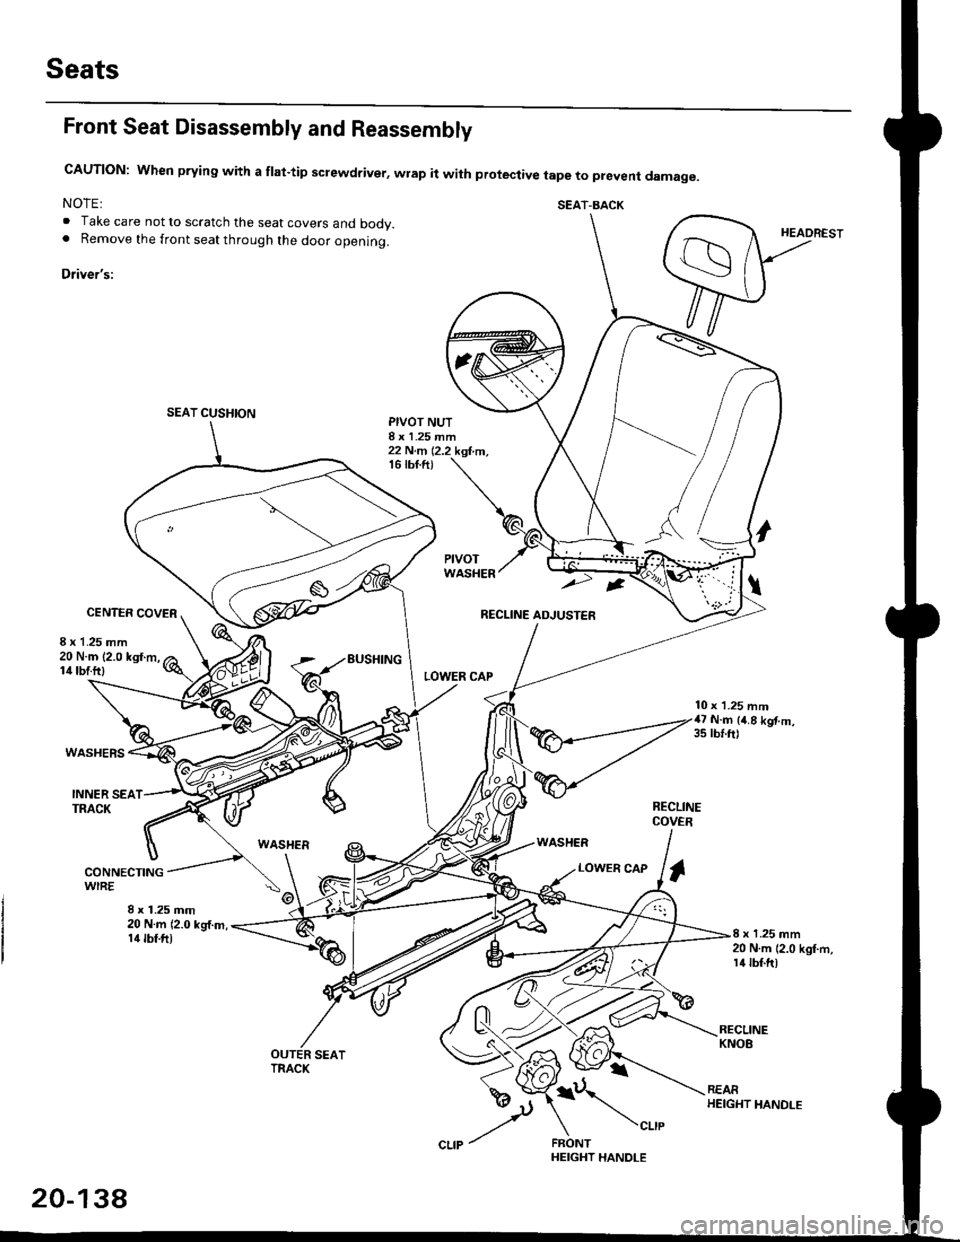 HONDA CIVIC 1998 6.G Workshop Manual Seats
Front Seat Disassembly and Reassembly
CAUTION: When prying with a flat-tip screwdriver, wrap it with protective tape to prevent damage.
NOTE: SEAT-BACK. Take care not to scratch the seat covers 